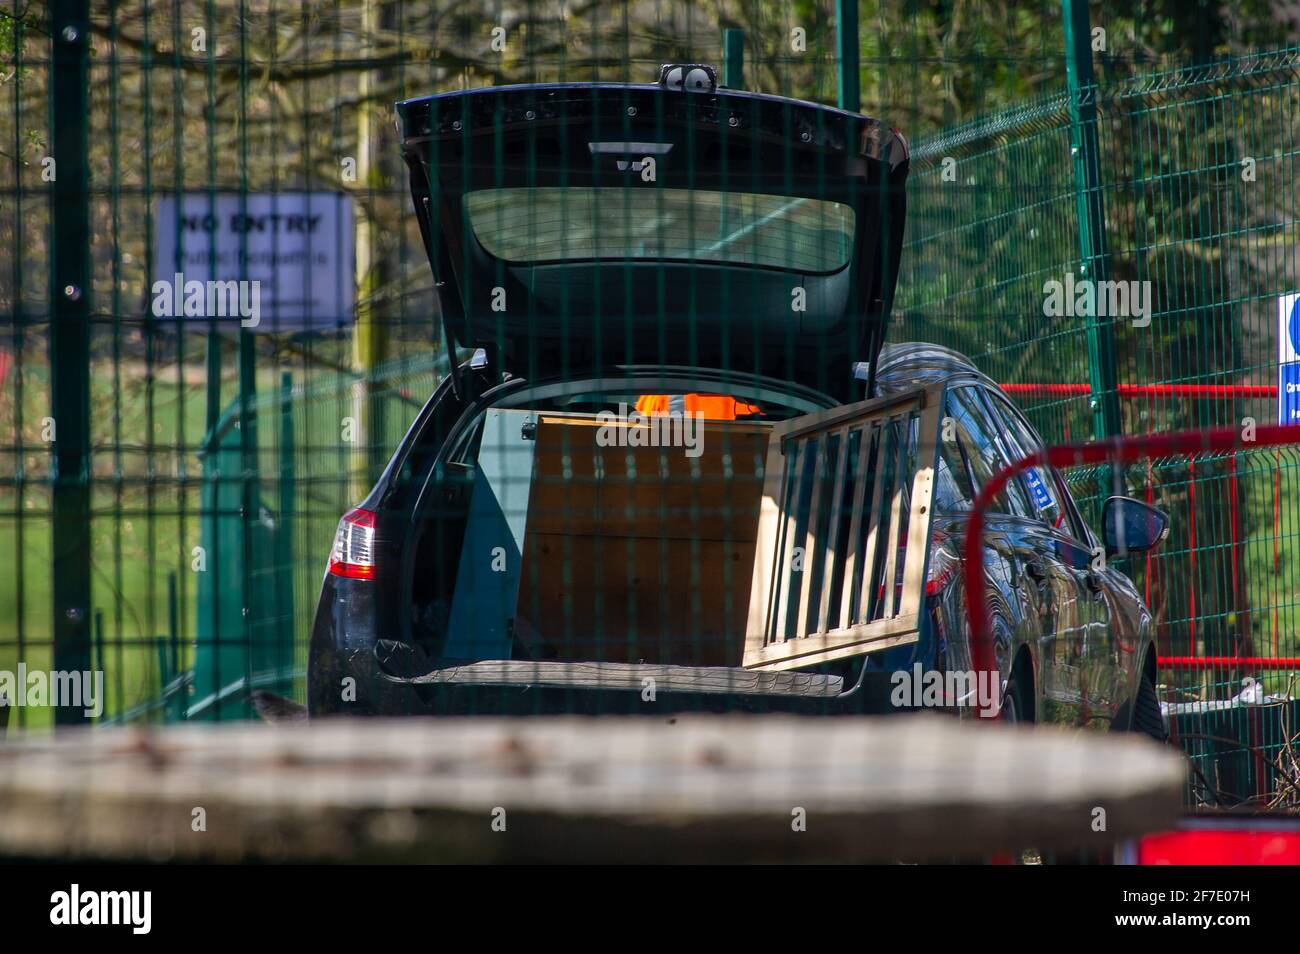 Aylesbury Vale, UK. 6th April, 2021. An HS2 dog handler lets his dog out of a cage in his car. Animal lovers are very concerned about HS2 and their use of guard dogs which are used as a deterrent to Stop HS2 protesters and members of the public walking past HS2 compounds. The High Speed 2 railway from London to Birmingham is having a huge detrimental impact upon wildlife and the environment. Credit: Maureen McLean/Alamy Stock Photo